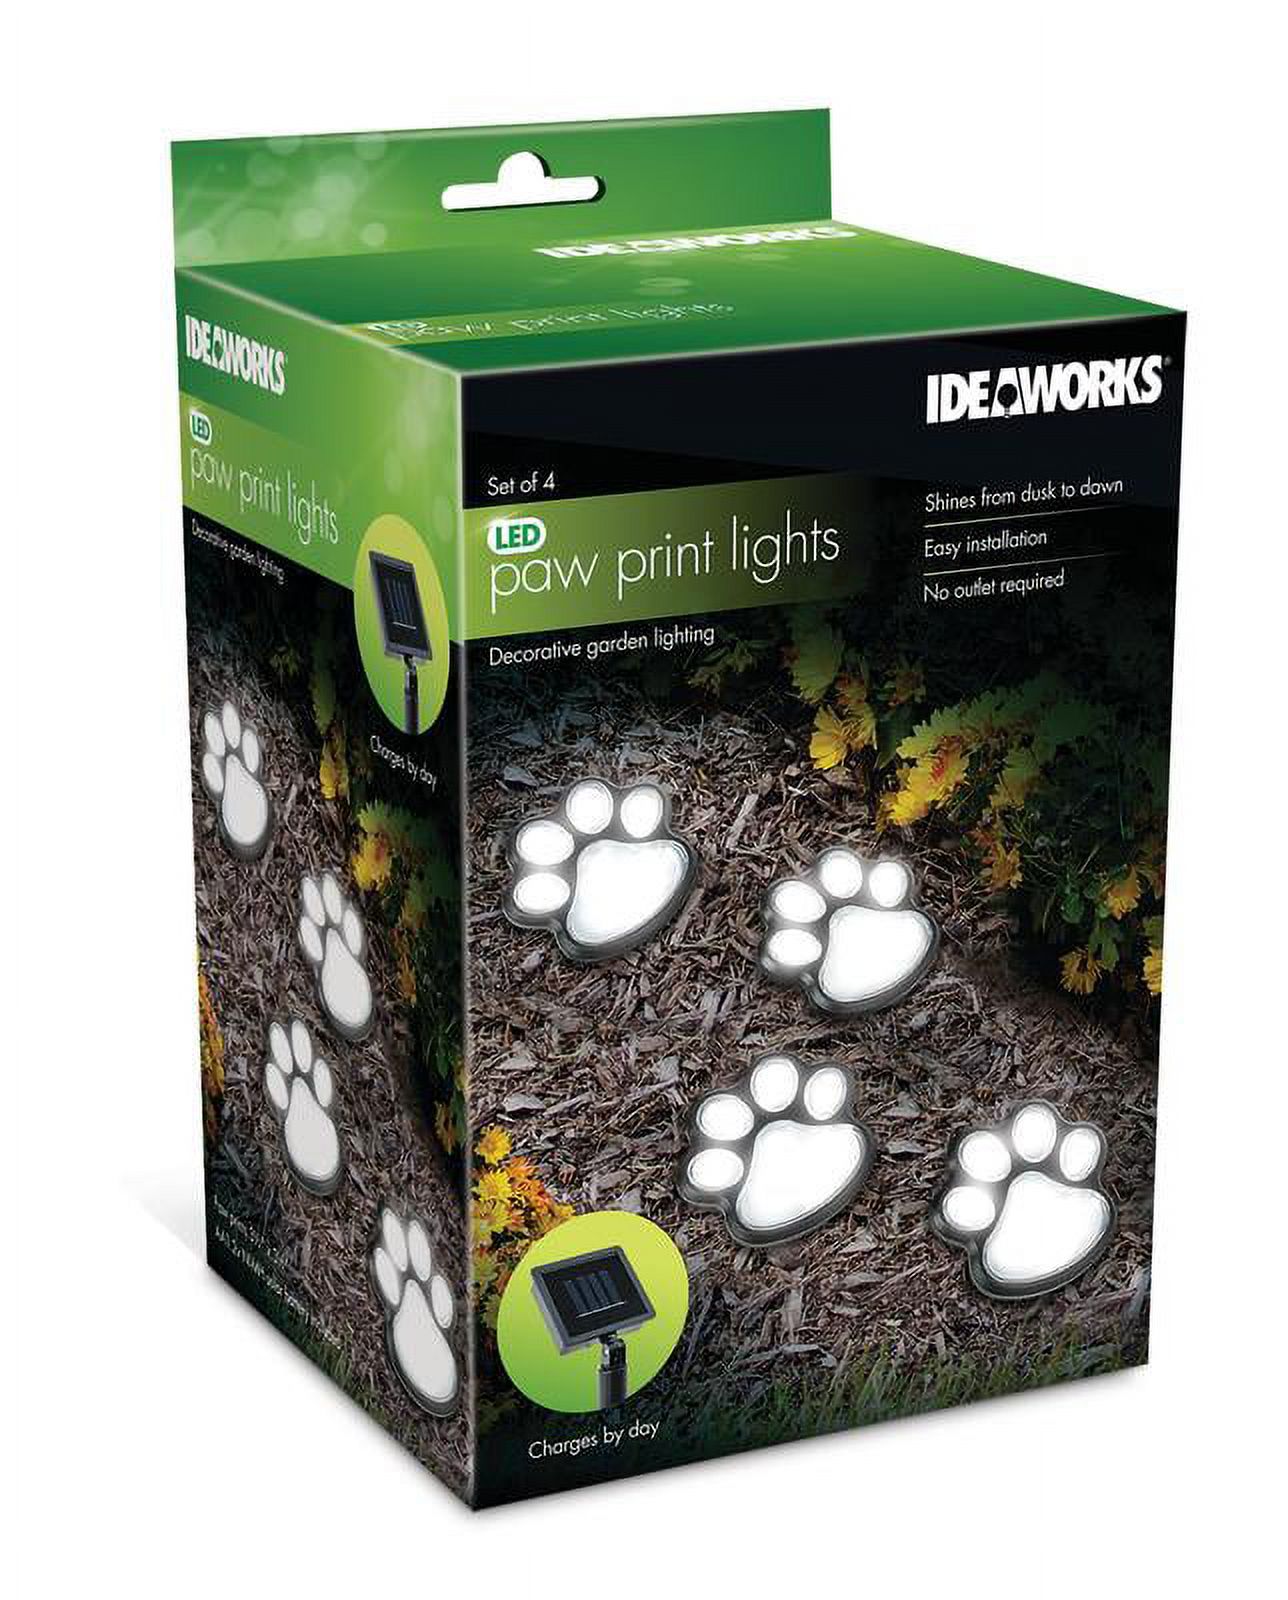 Ideaworks JB7356 Dog Paw Solar Lights Outdoor Panels - Bright Energy Efficient and Perfect for your Garden - 4 pc Set, Black - image 2 of 4